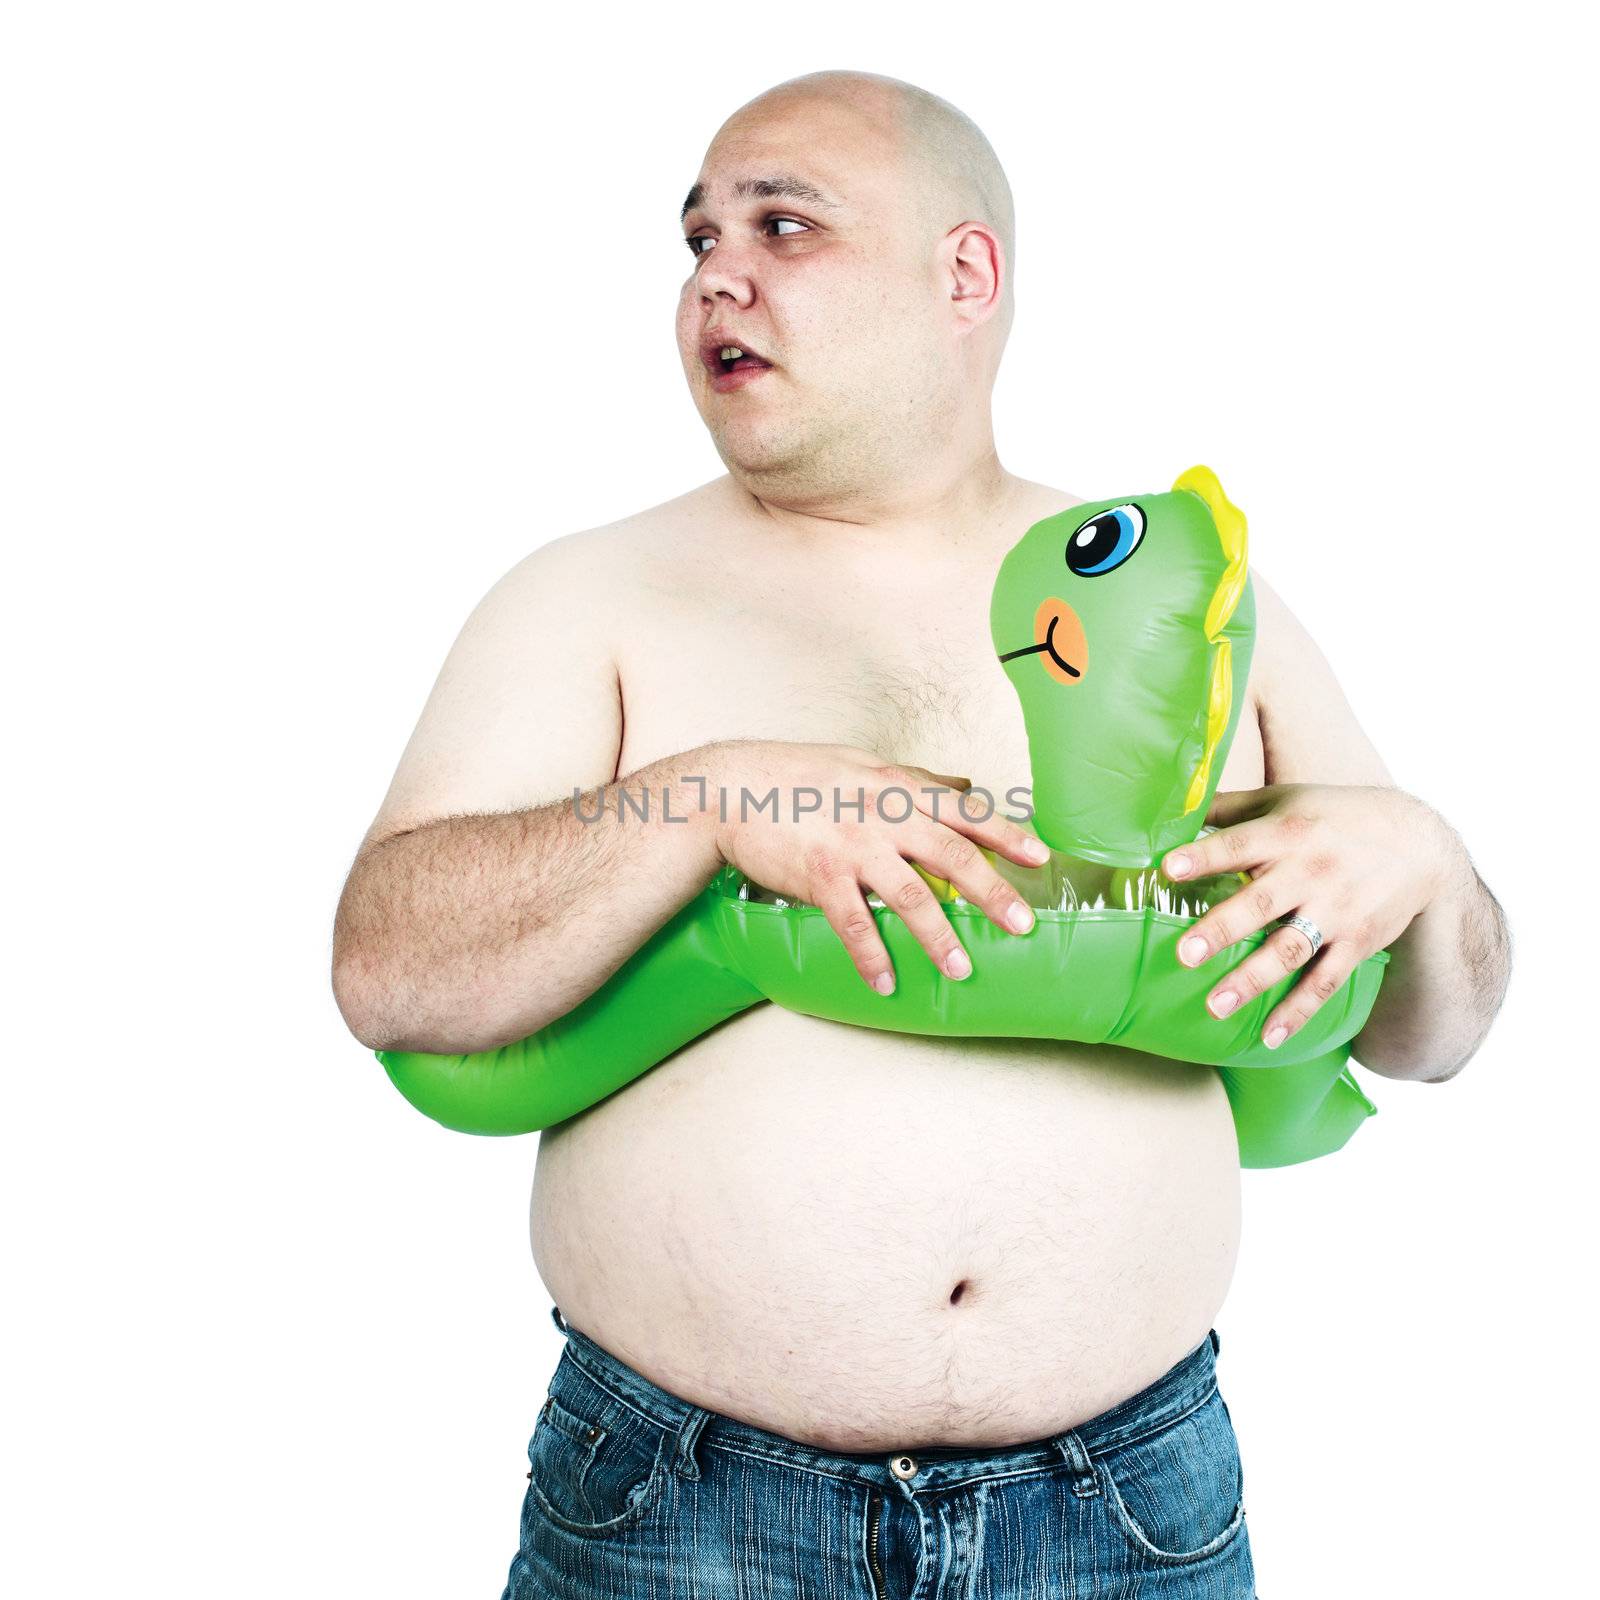 A large man with inflatable toy looks for the pool or the beach.
